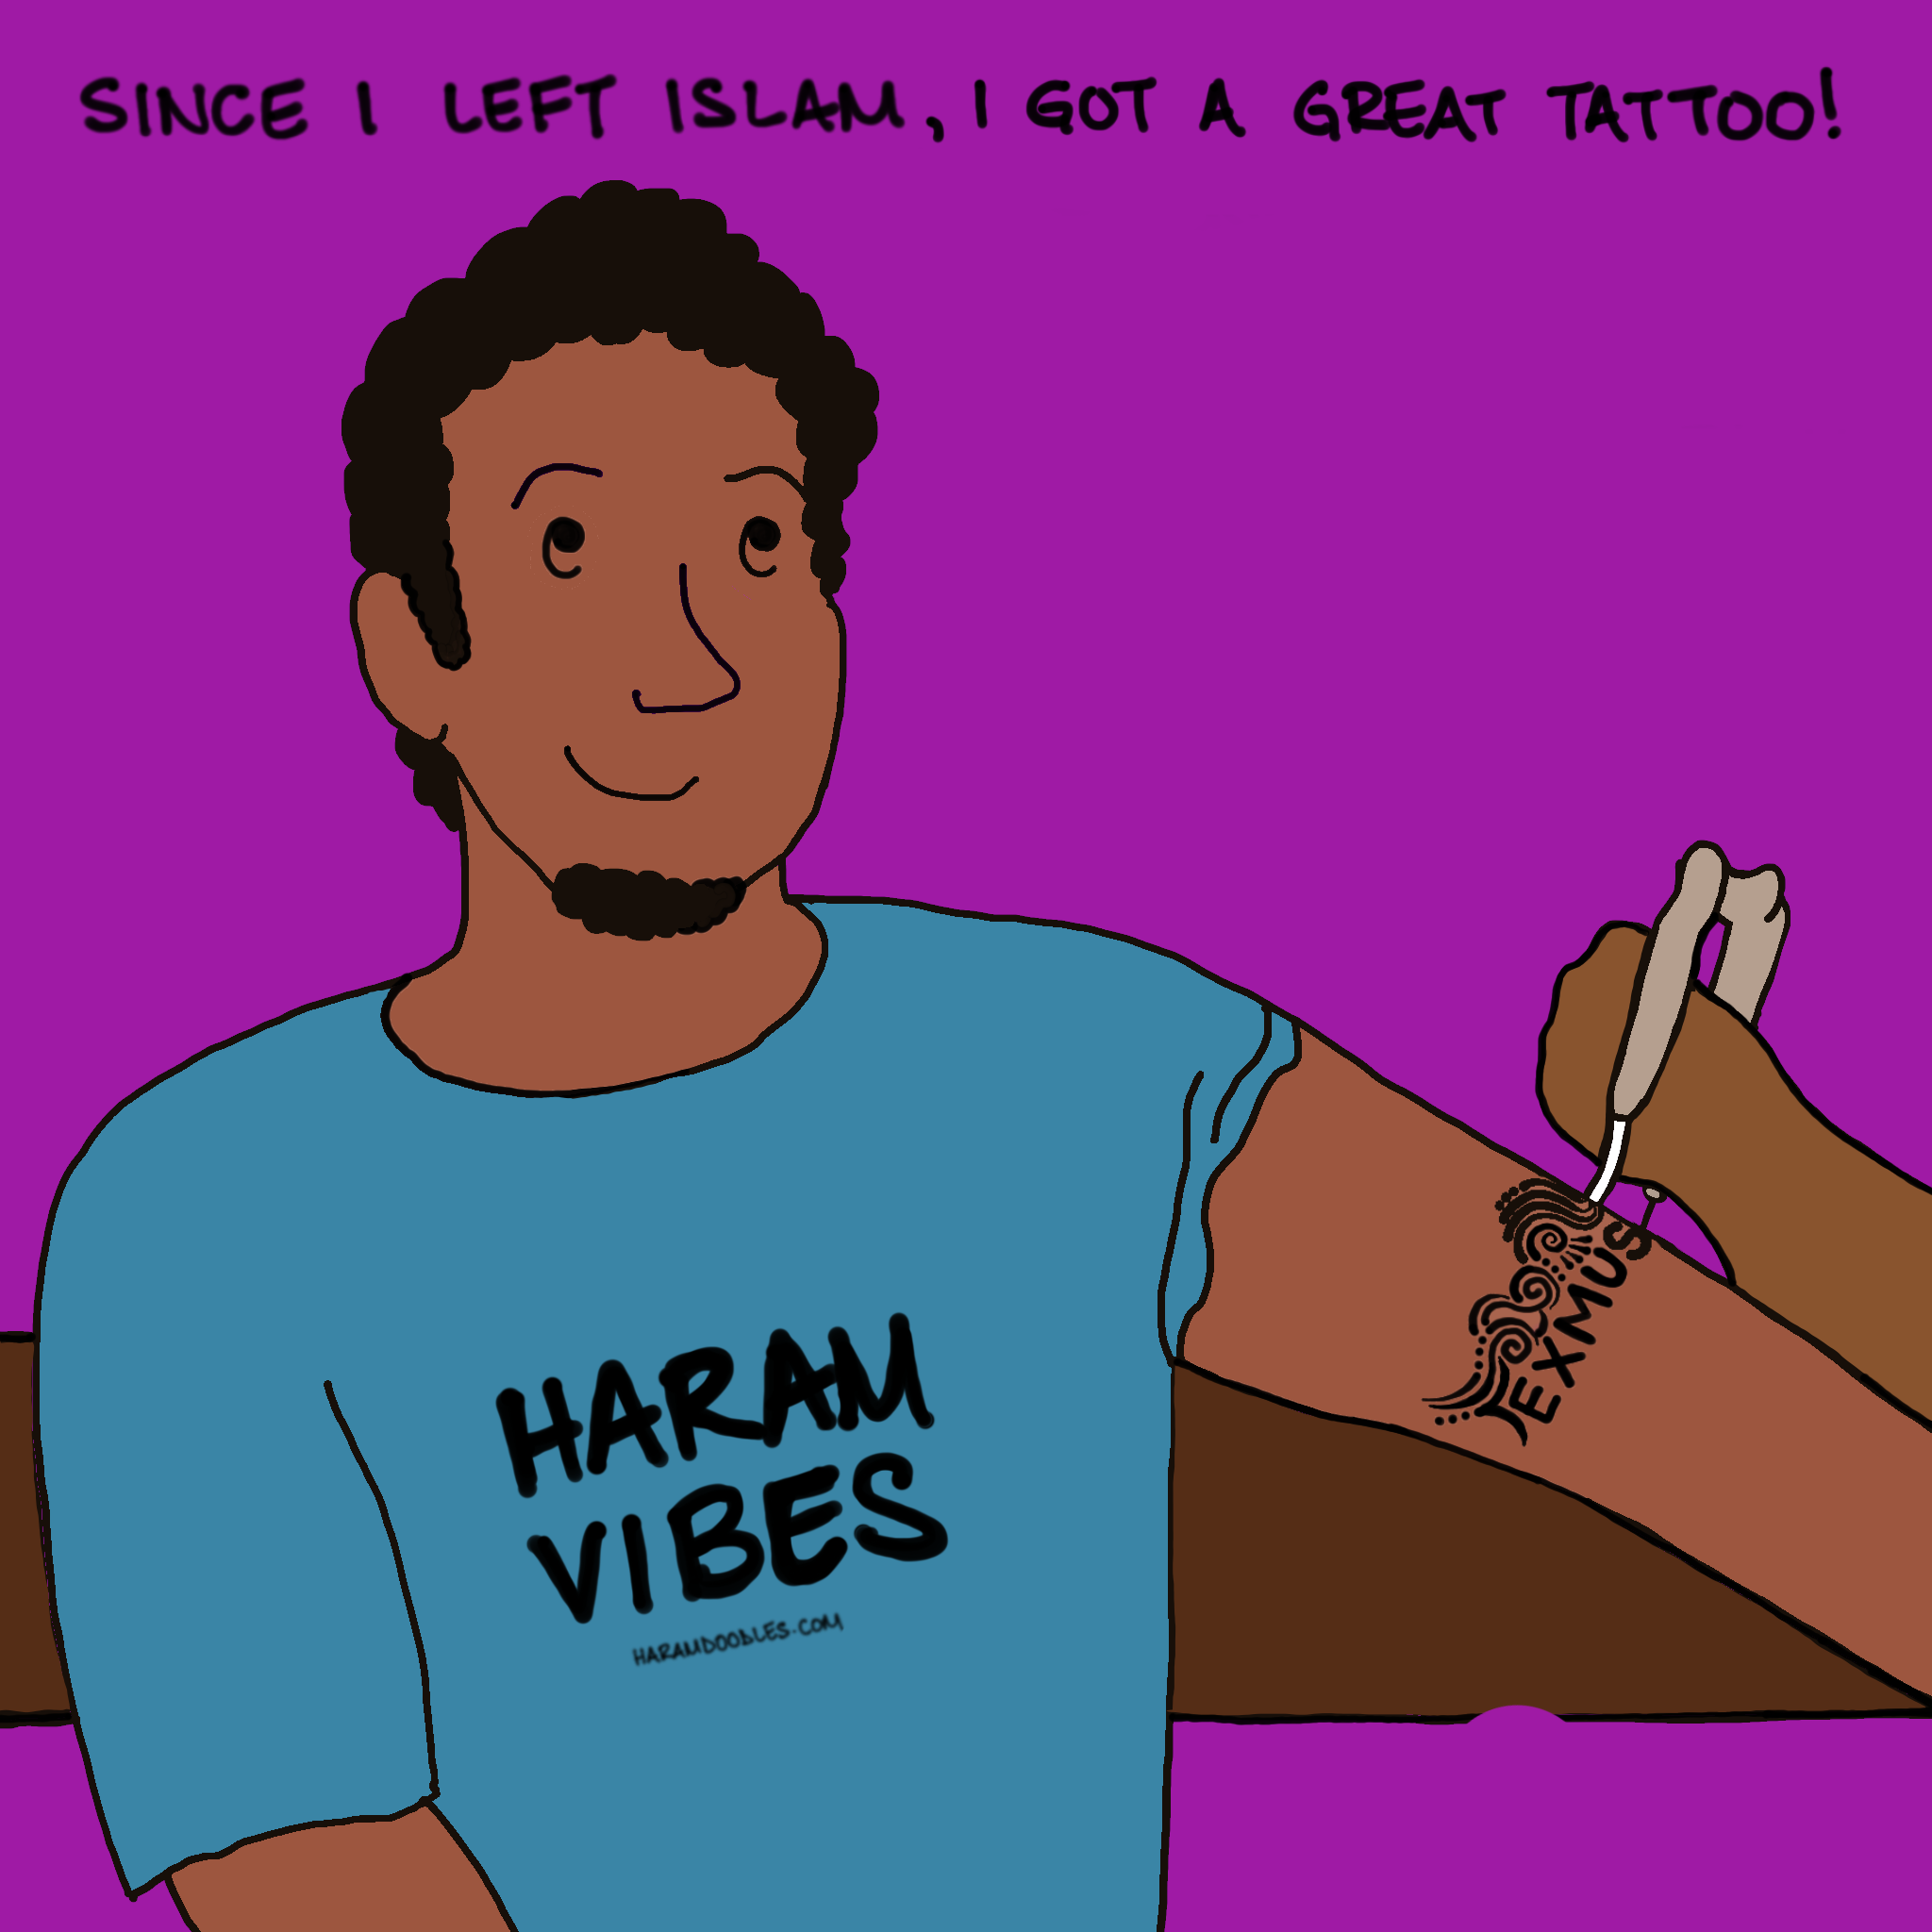 Since I left Islam Series by ExMuslims